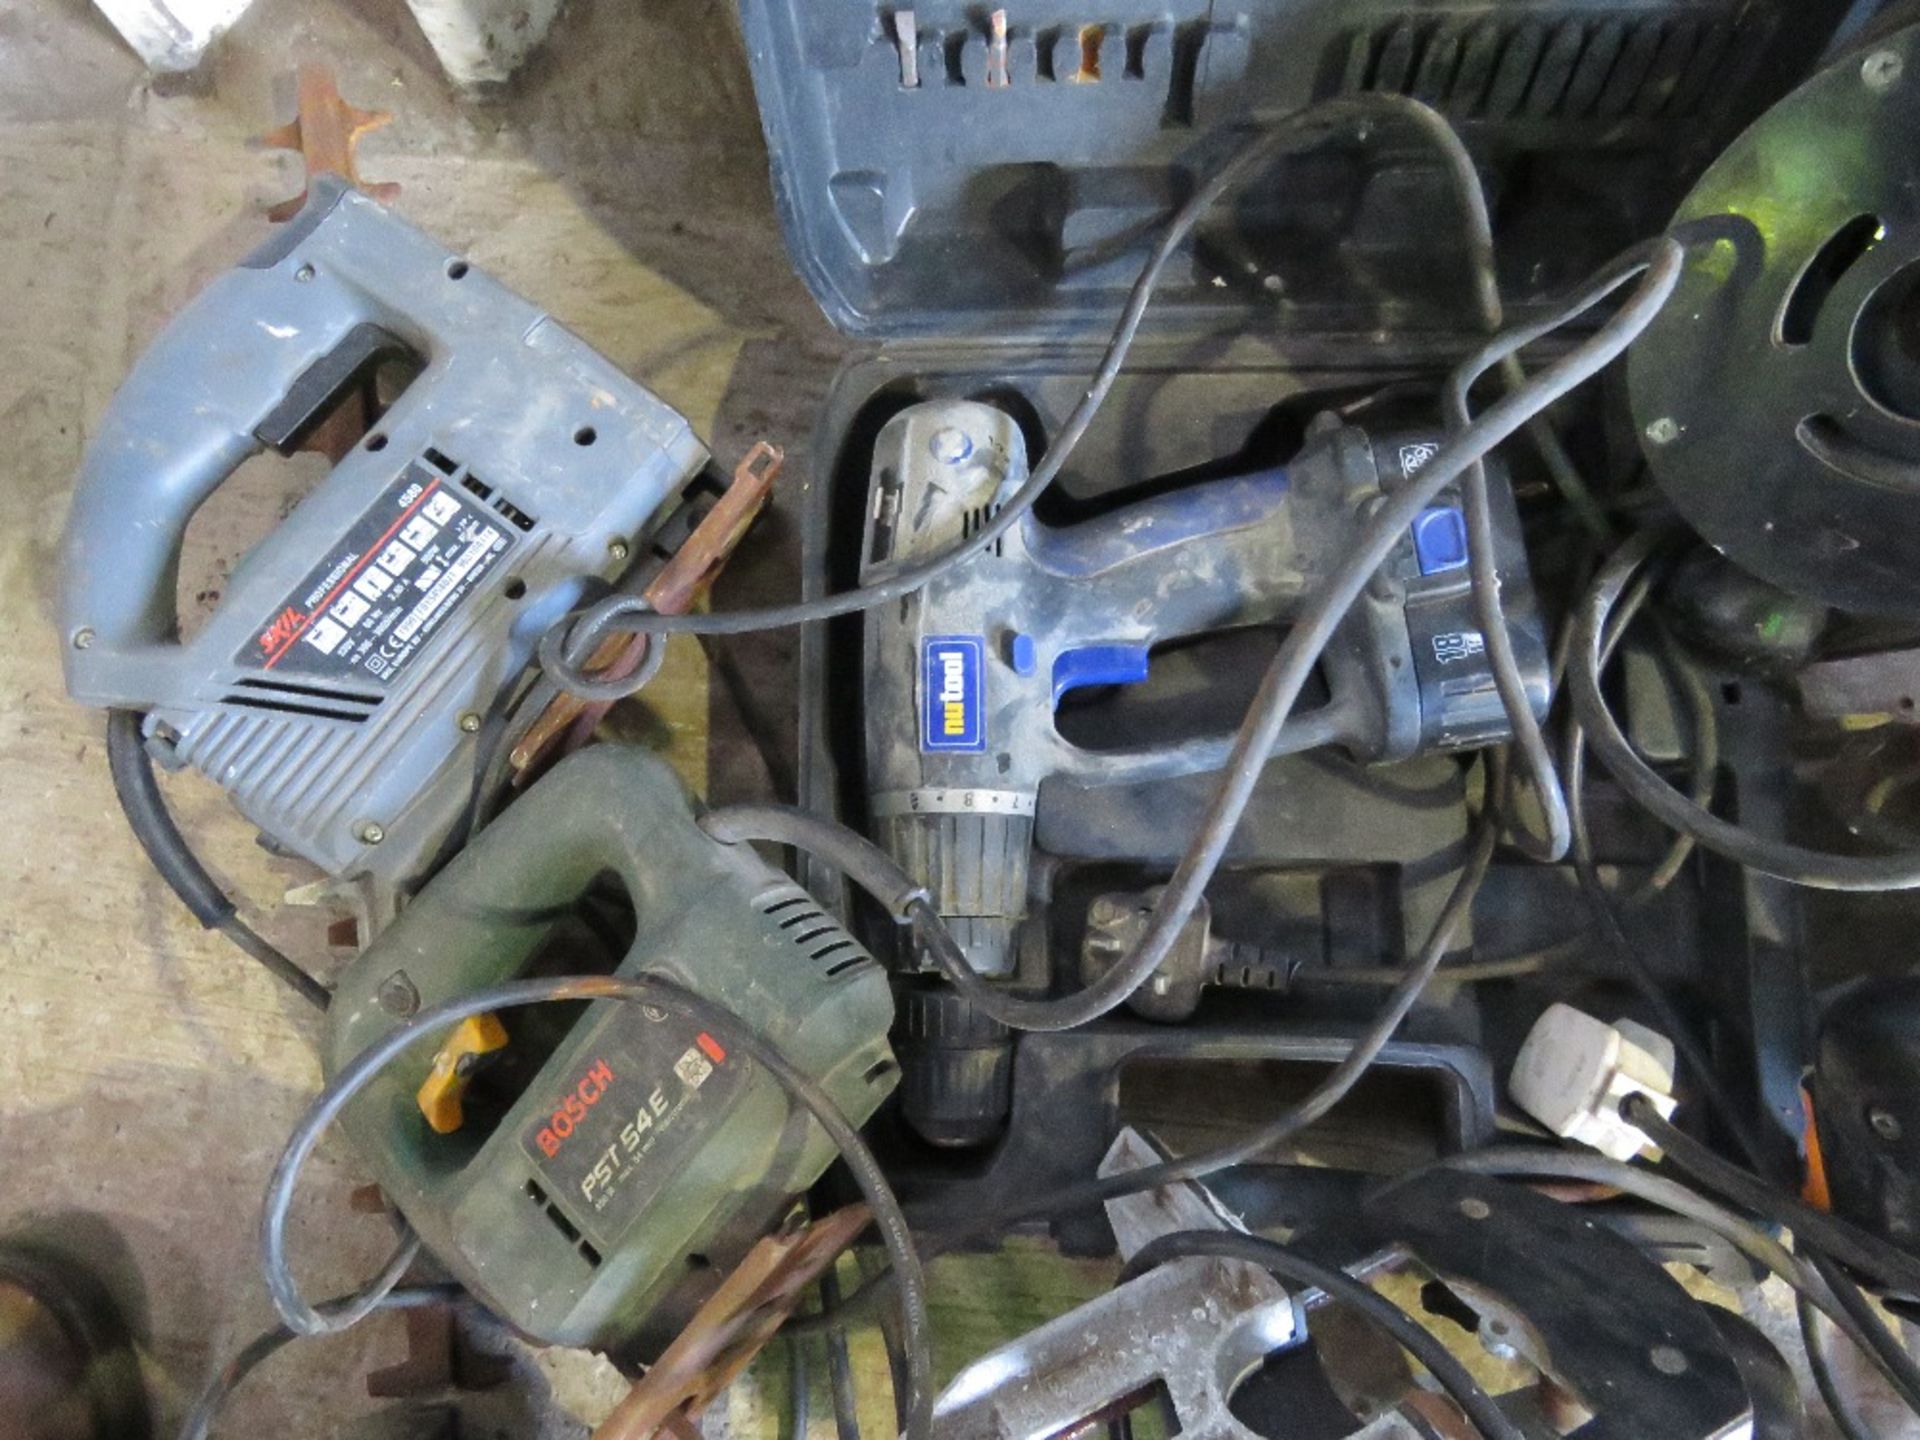 4 X ROUTERS, 2 X JIGSAWS PLUS A BATTERY DRILL. THIS LOT IS SOLD UNDER THE AUCTIONEERS MARGIN SCHE - Image 4 of 6